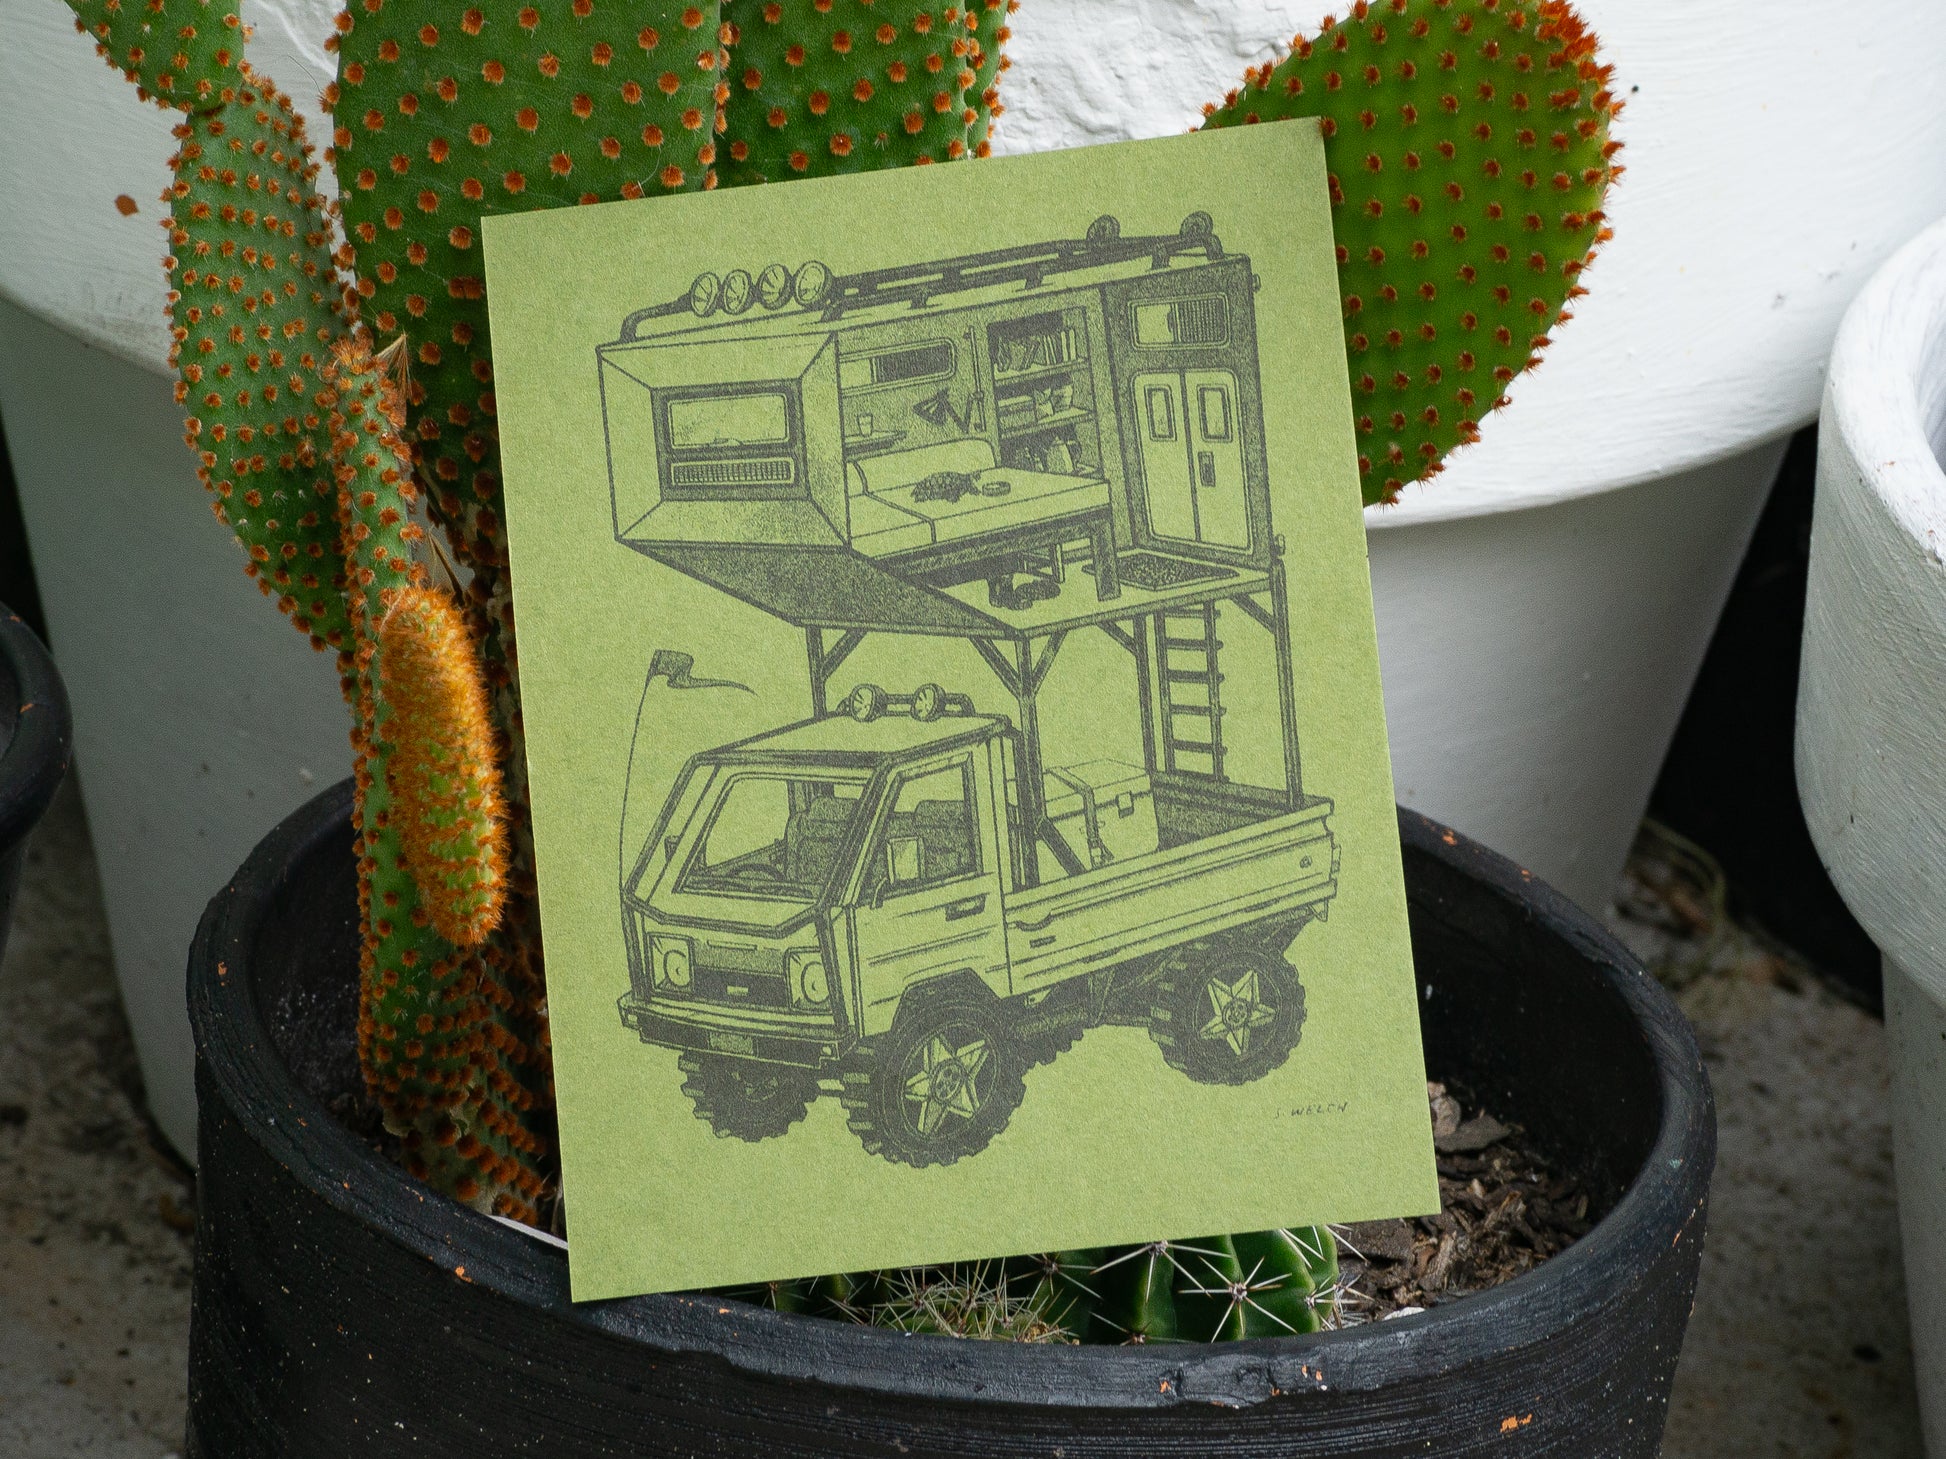 Kei truck art print on green paper in a cactus pot.